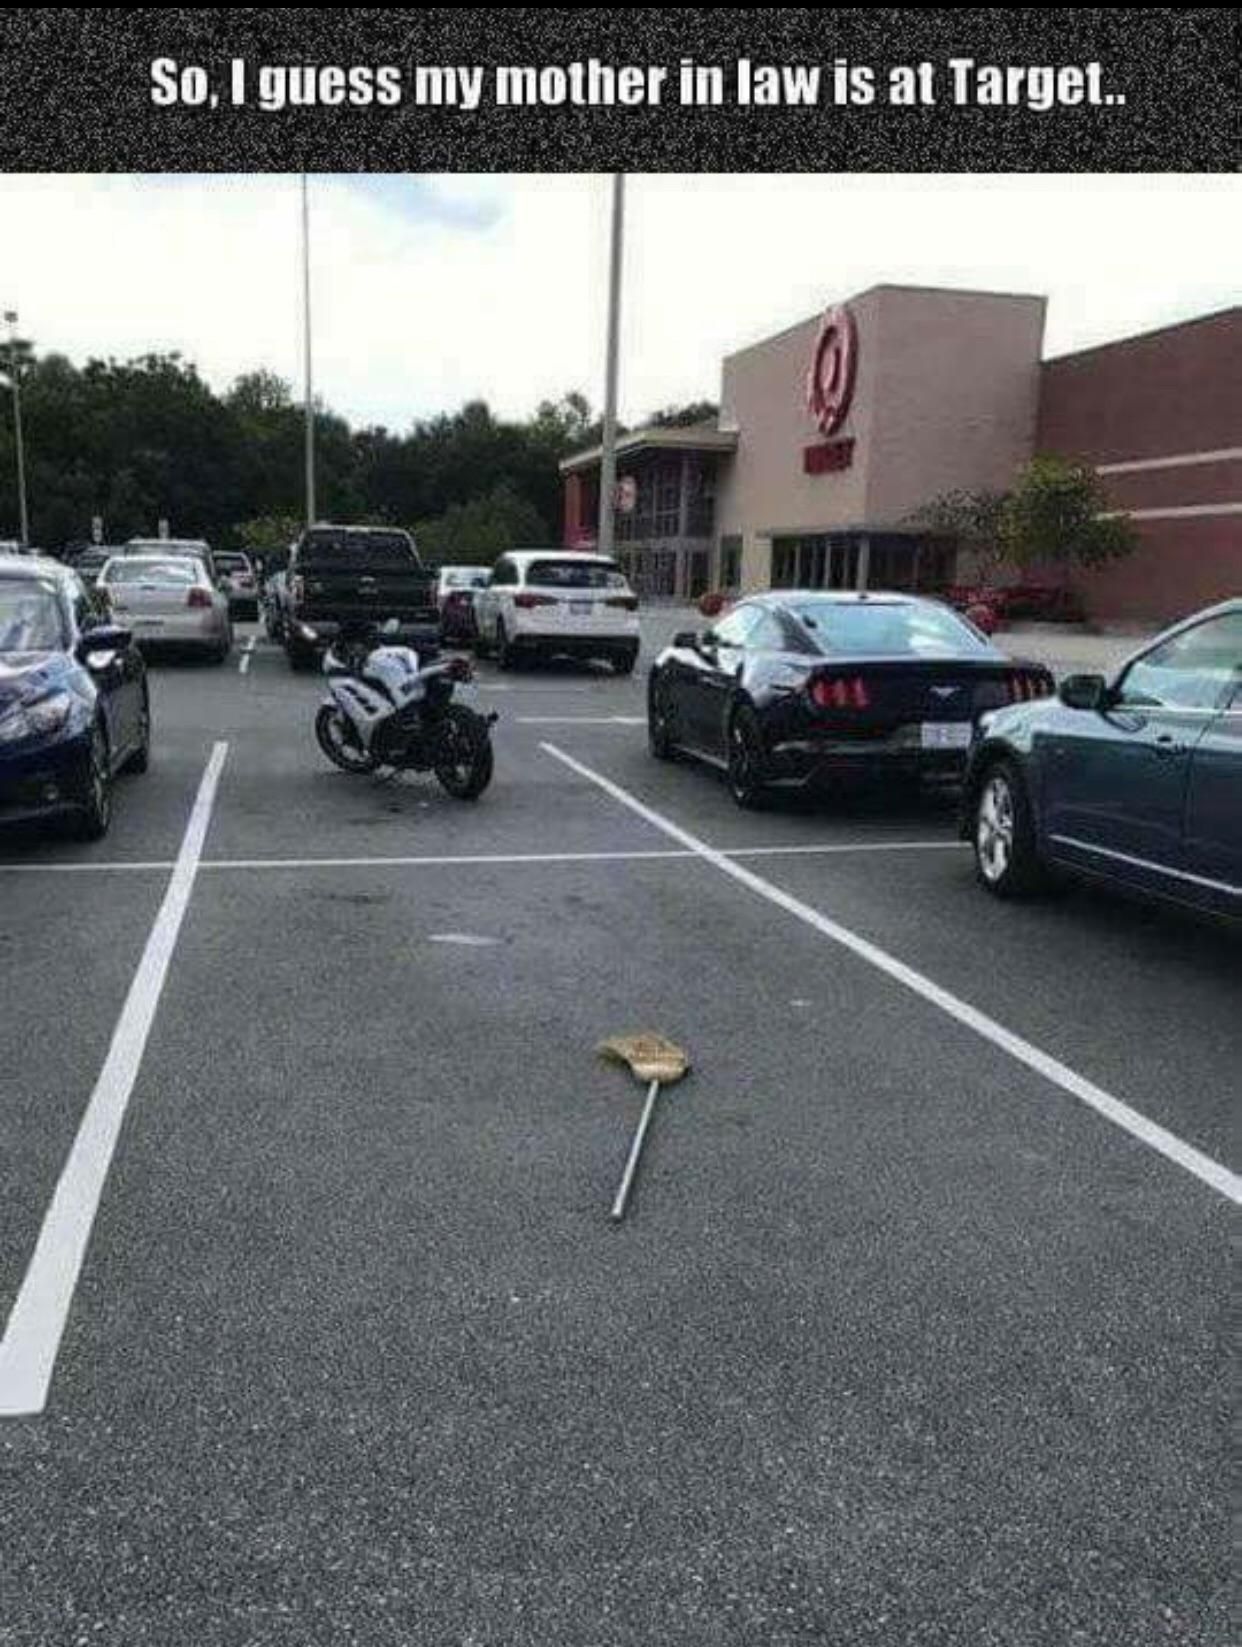 Guess I’m not going to this target location.